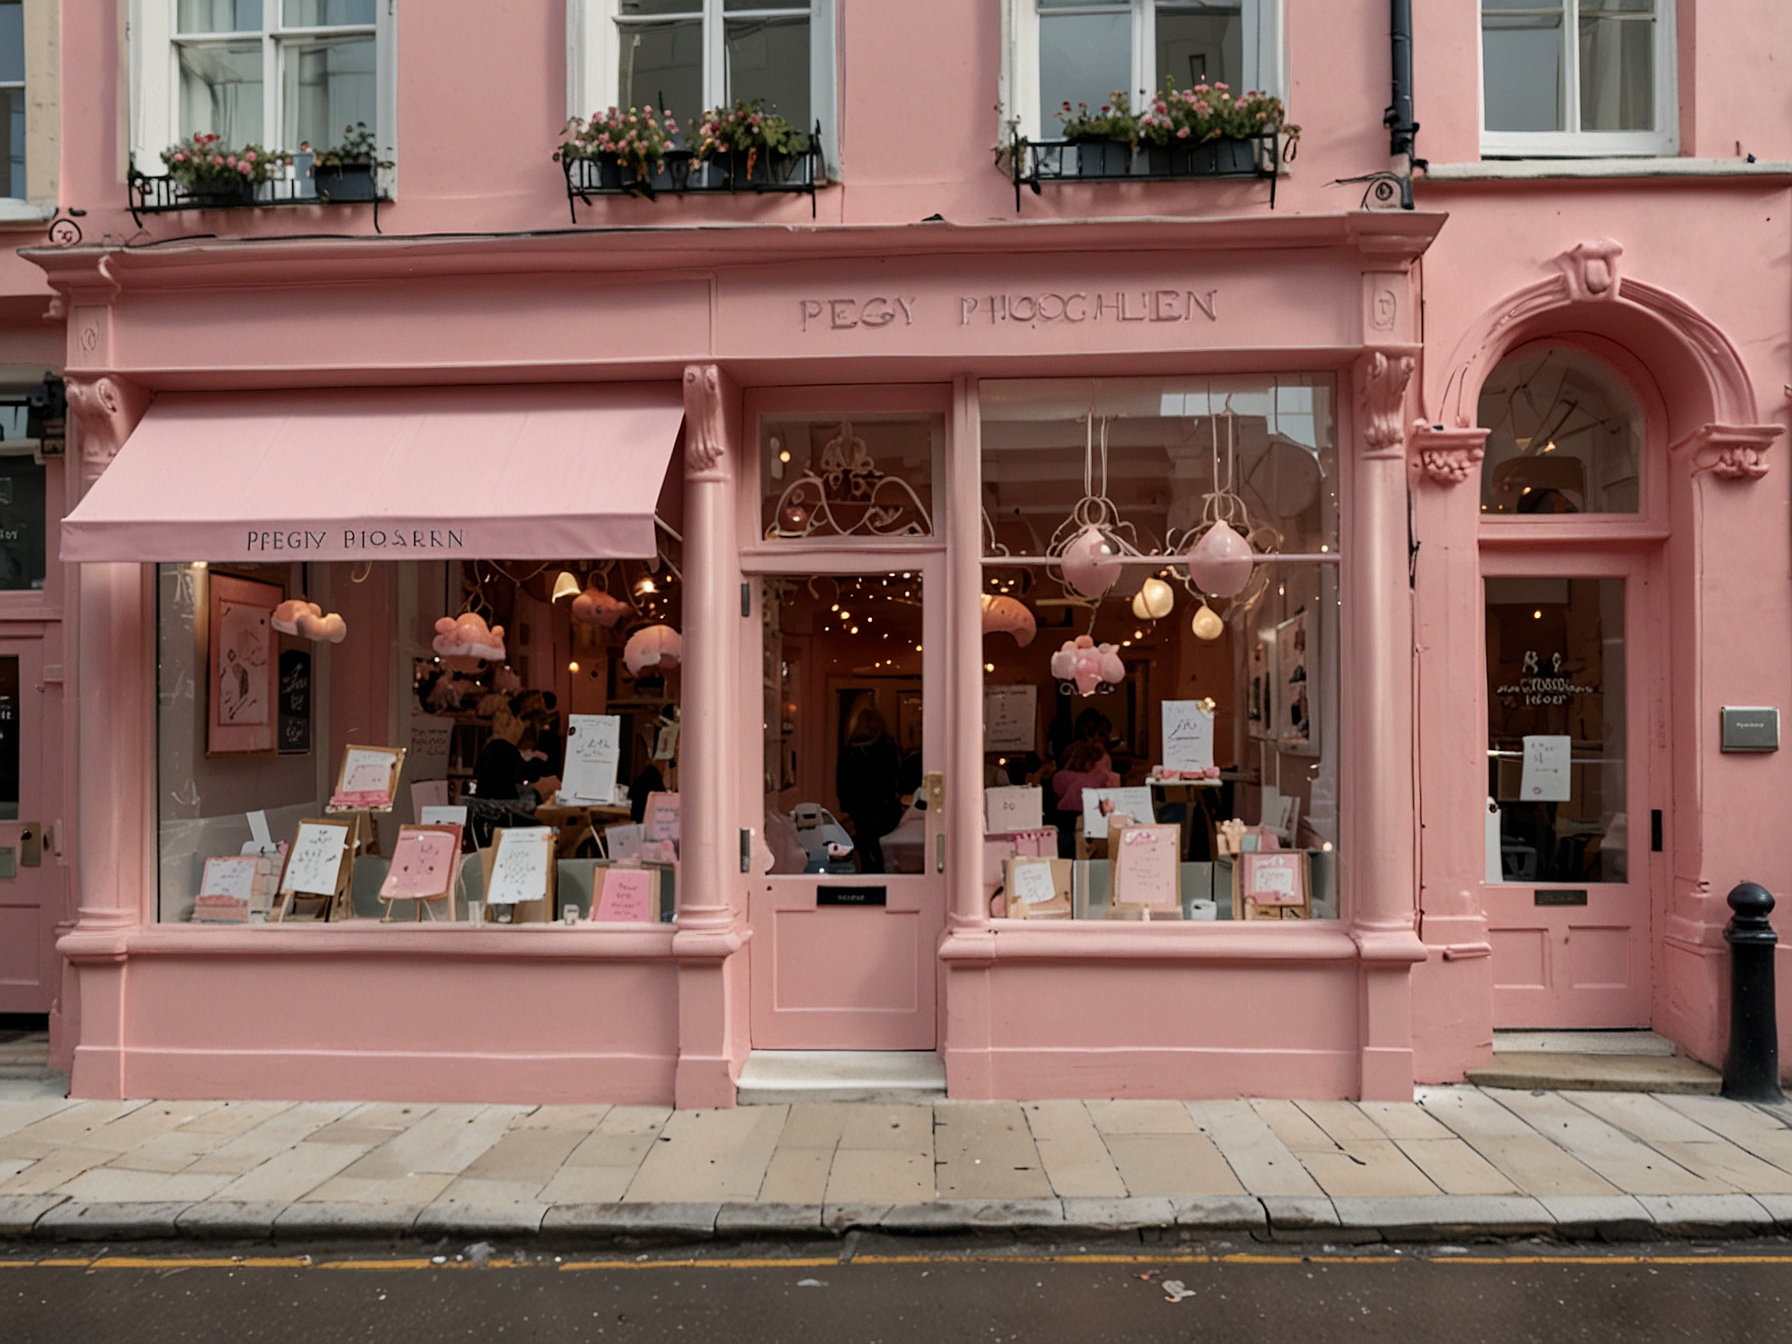 The enchanting pink exterior of Peggy Porschen in Belgravia, capturing its fairy-tale charm and the intricate, beautiful pastries found within.